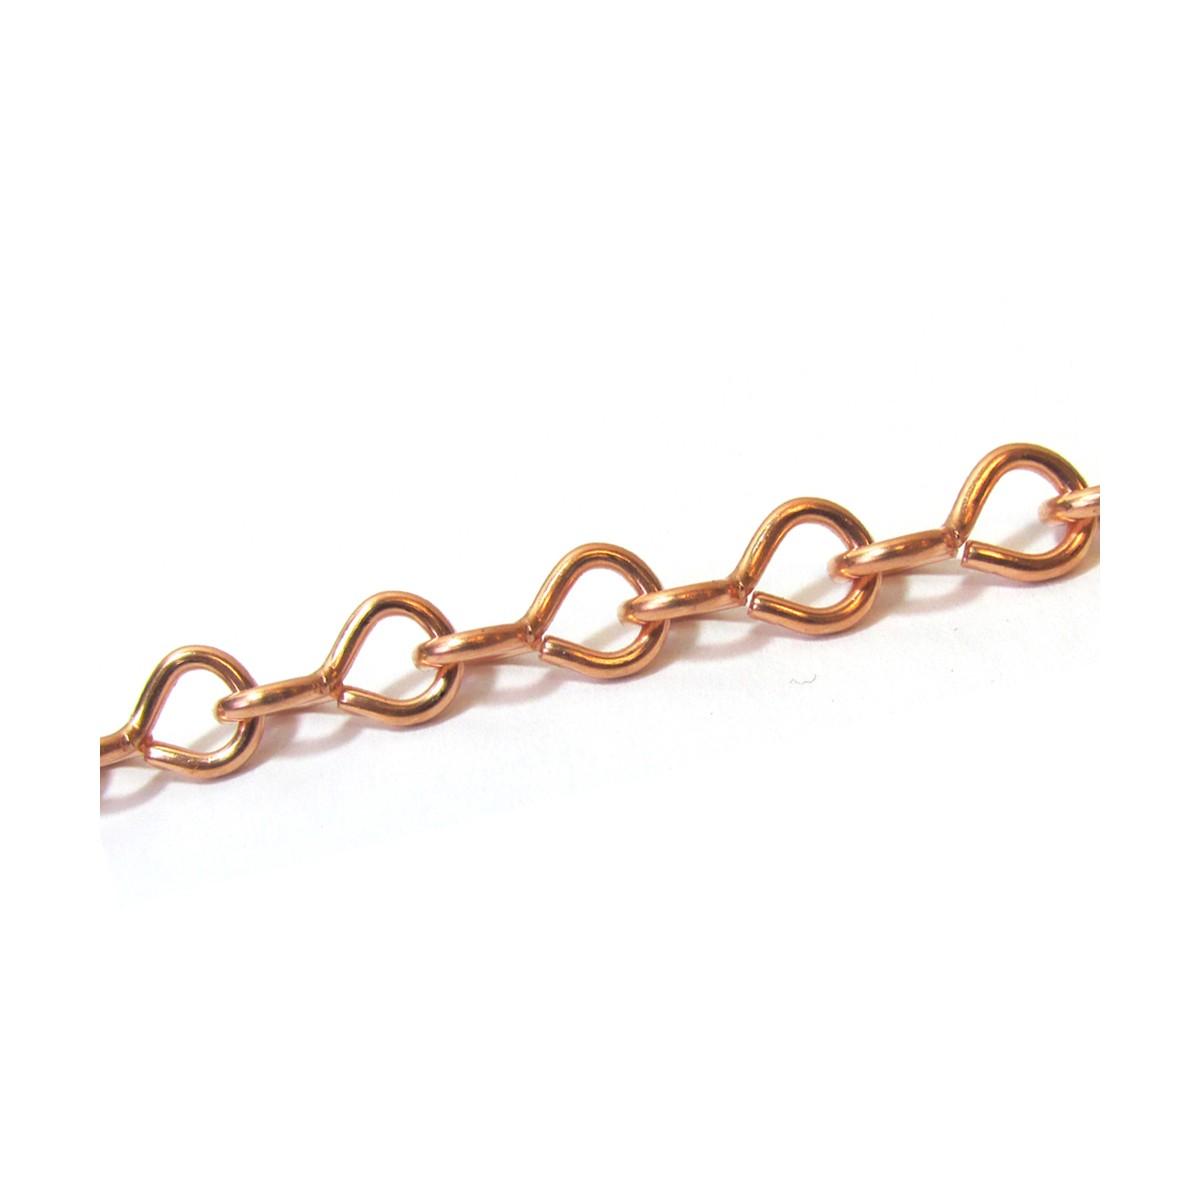 Copper plated glasses craft chain